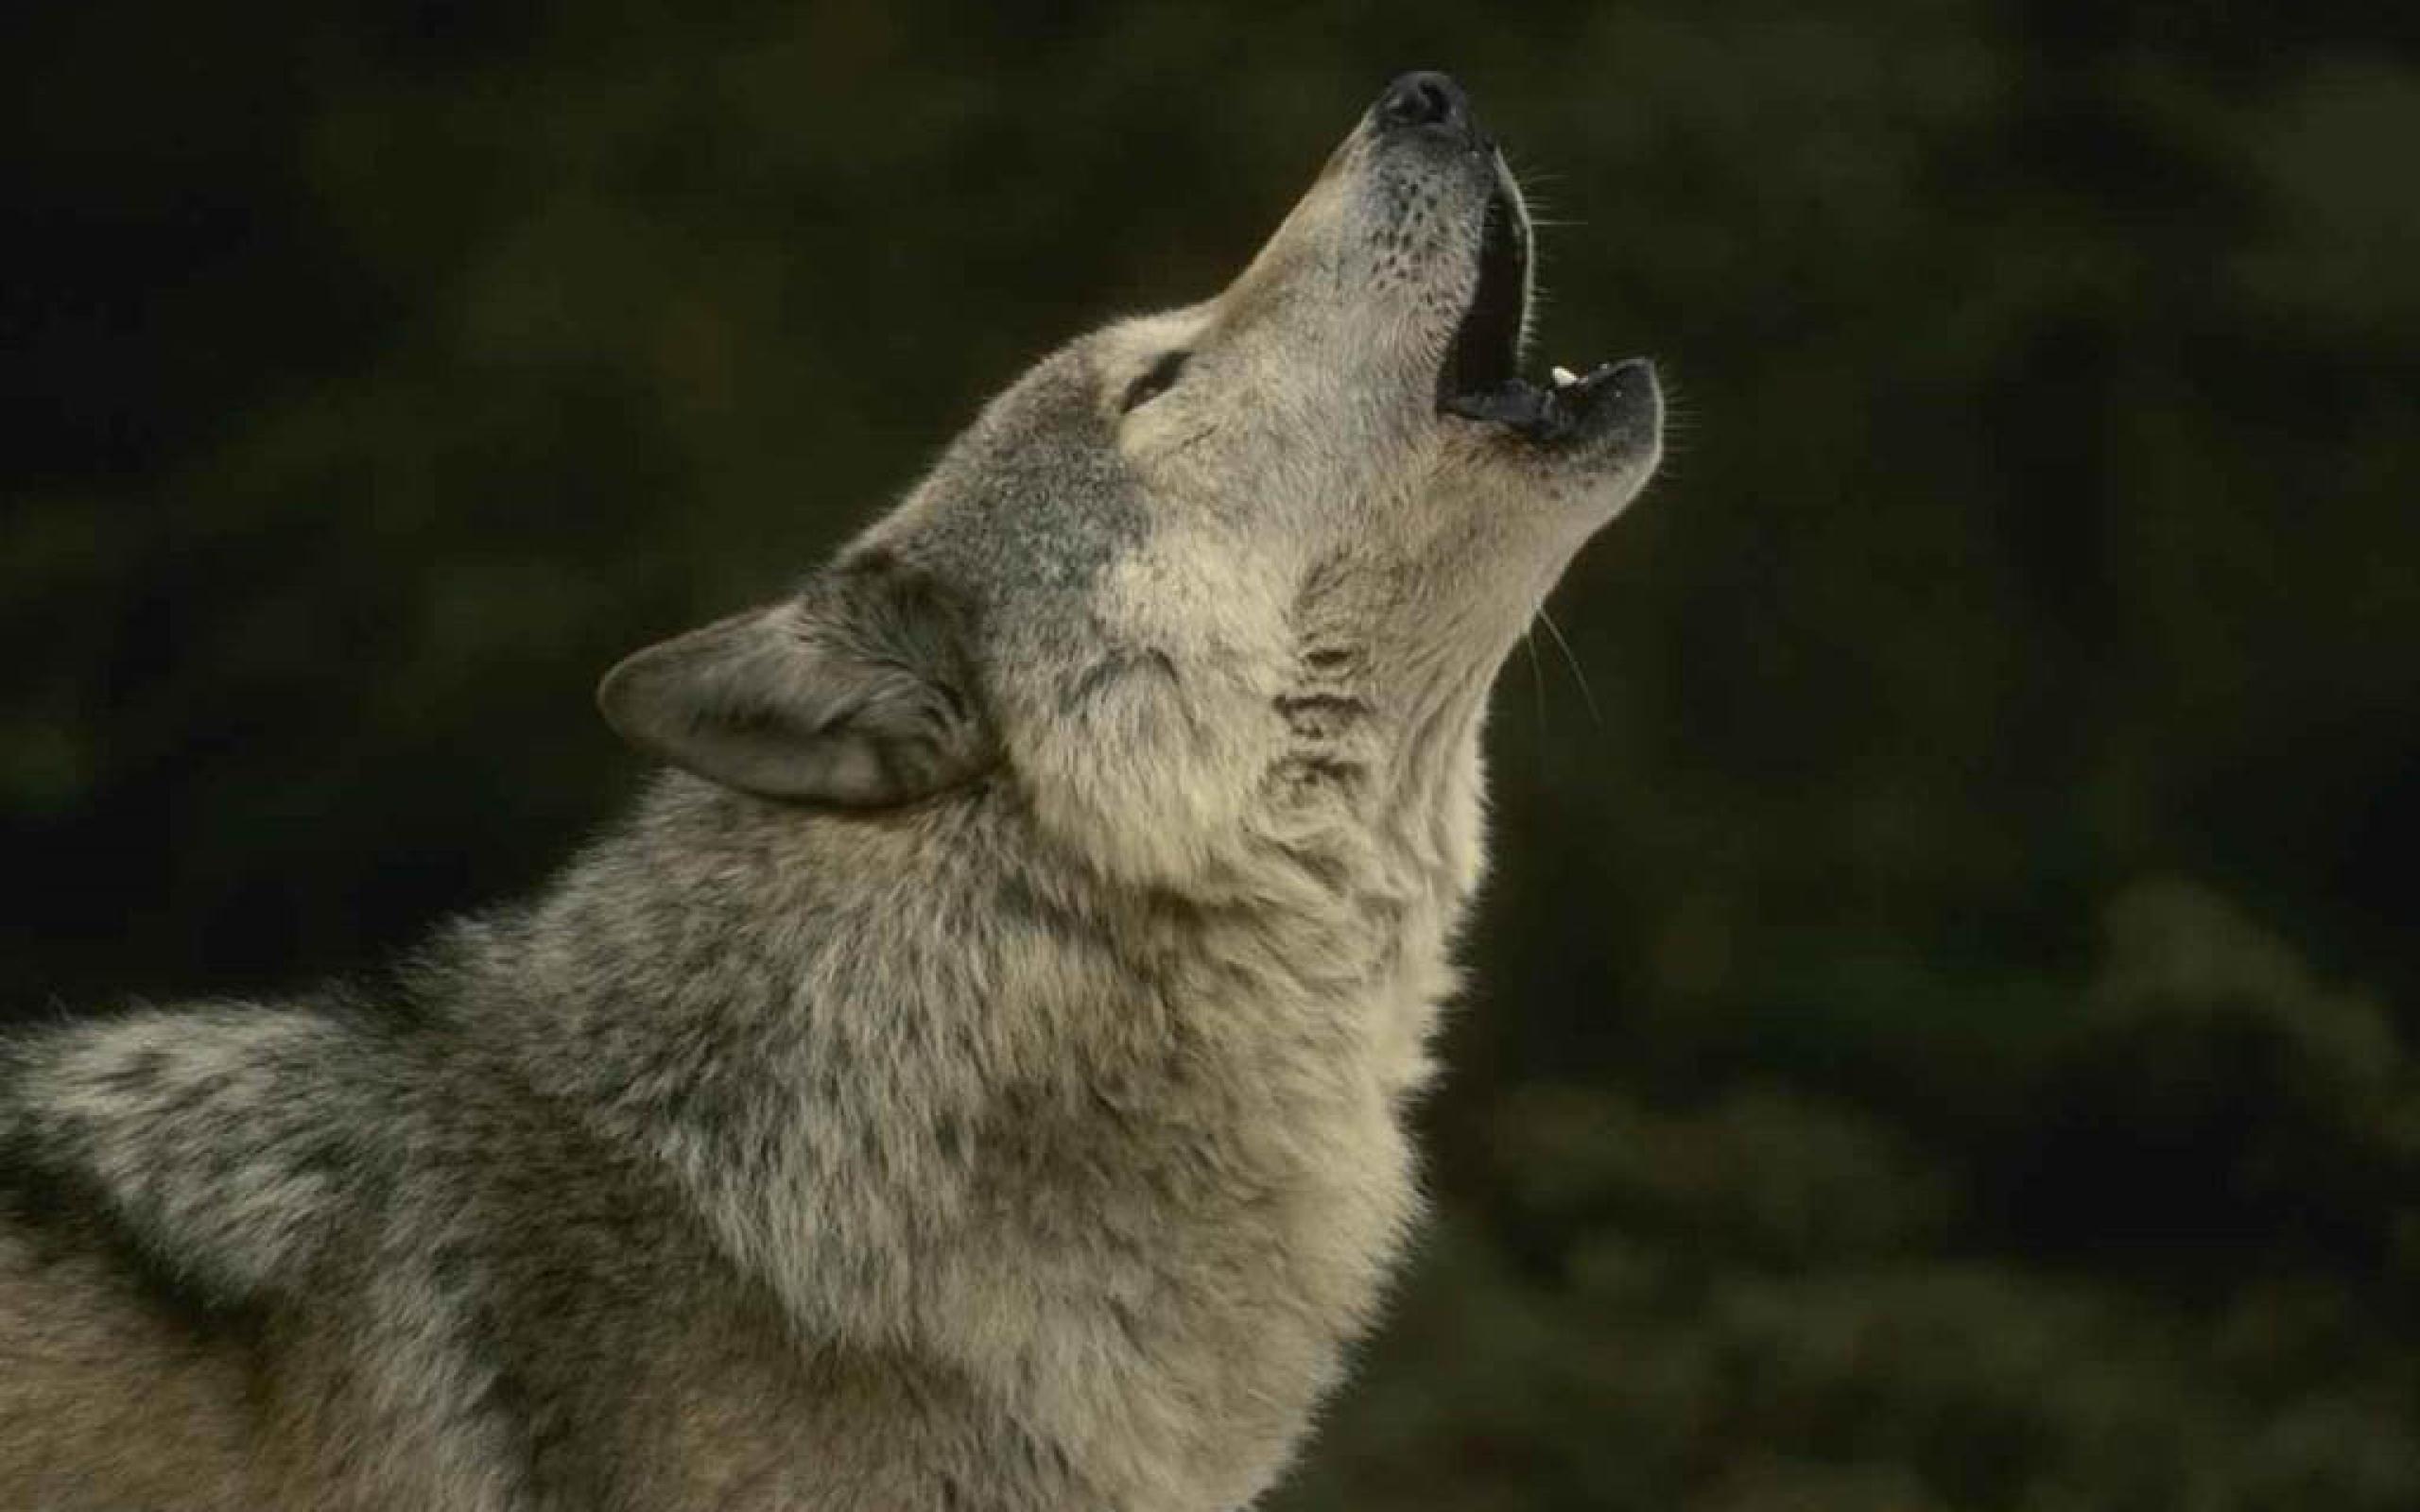 Wolves Howling Video